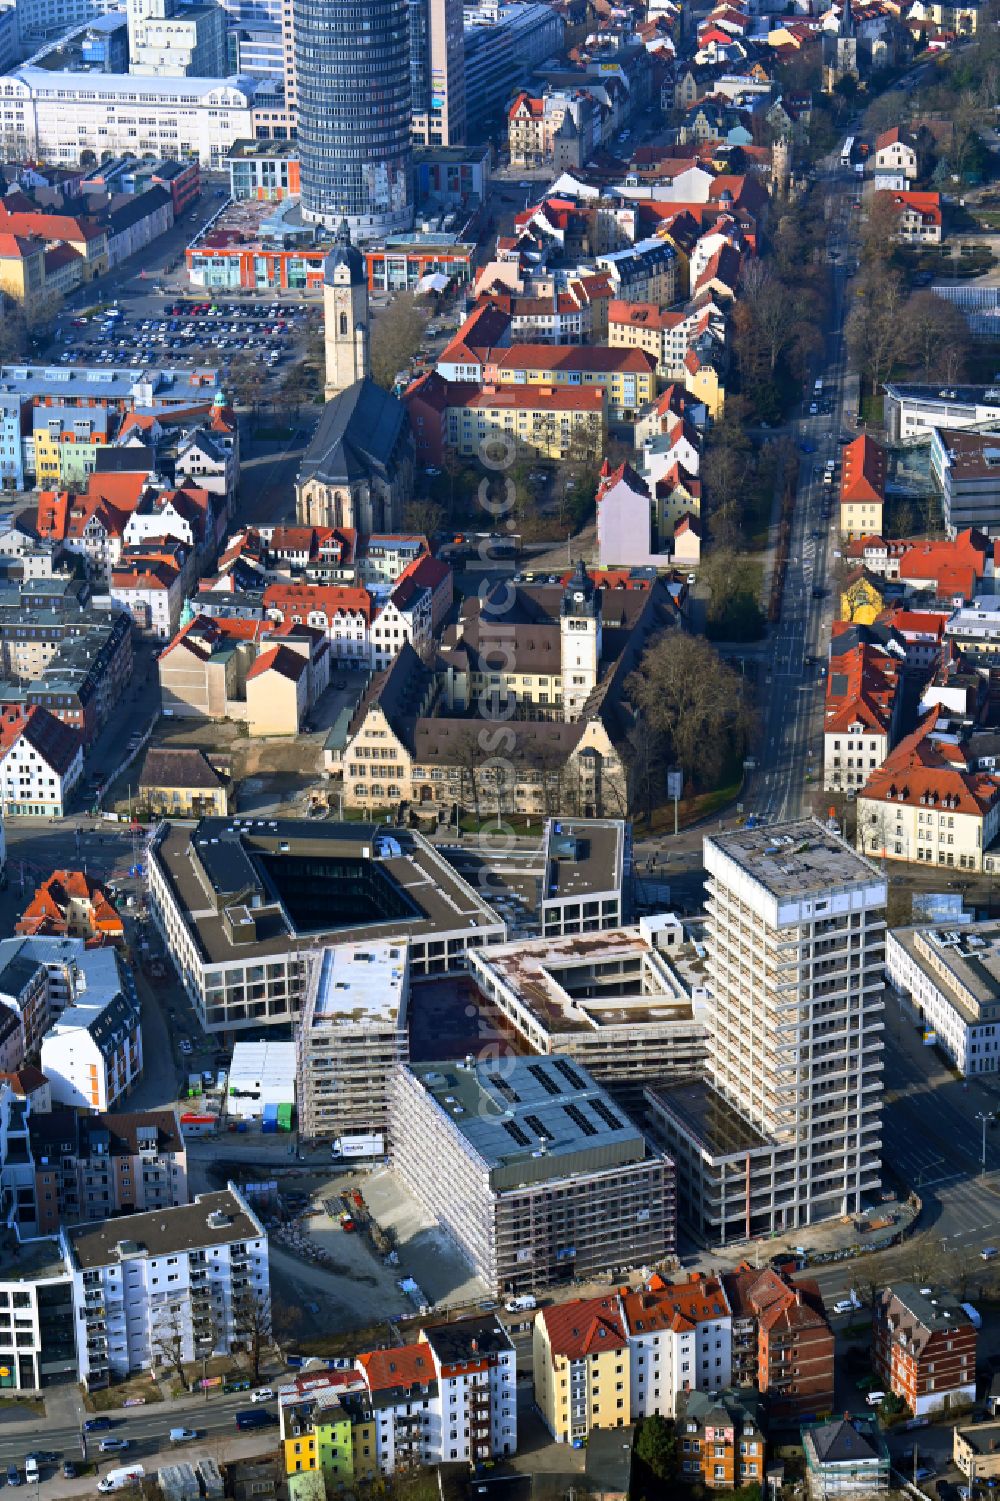 Aerial image Jena - Complementary new construction site on the campus-university building complex Campus Inselplatz on Loebdegraben - Steinweg in Jena in the state Thuringia, Germany